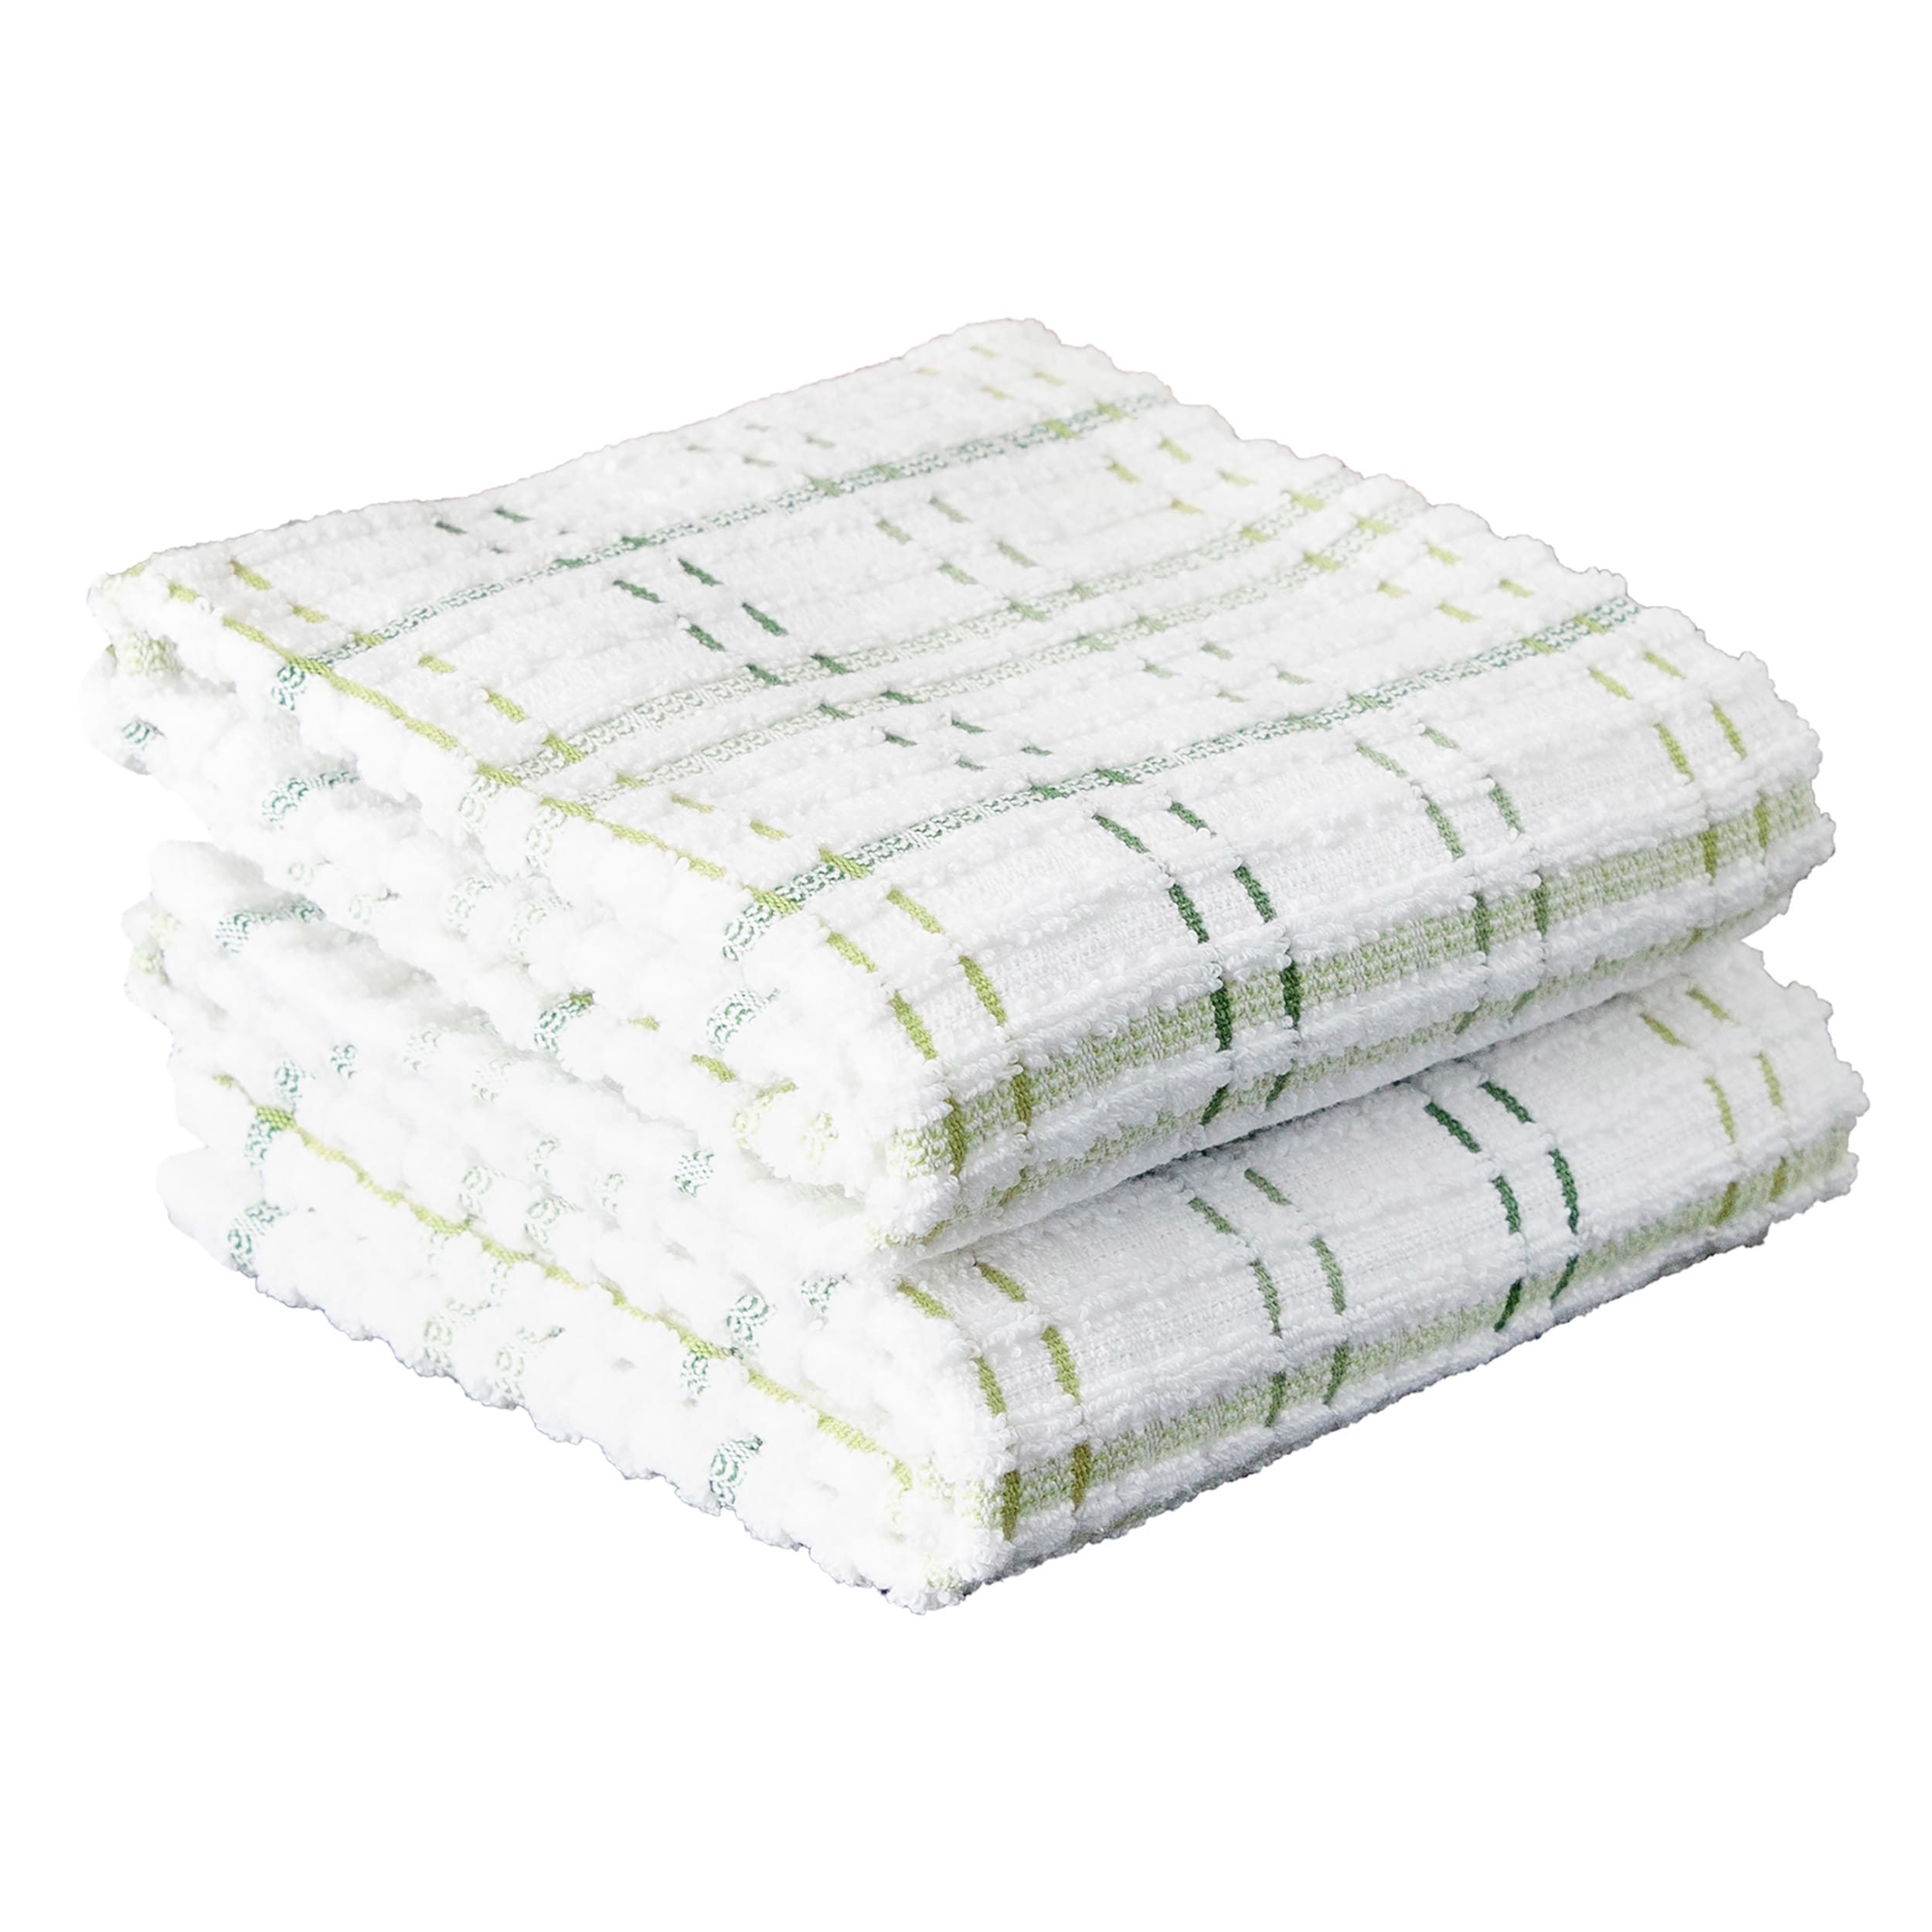 Ritz Royale White Solid Cotton Dish Cloth (Set of 3)